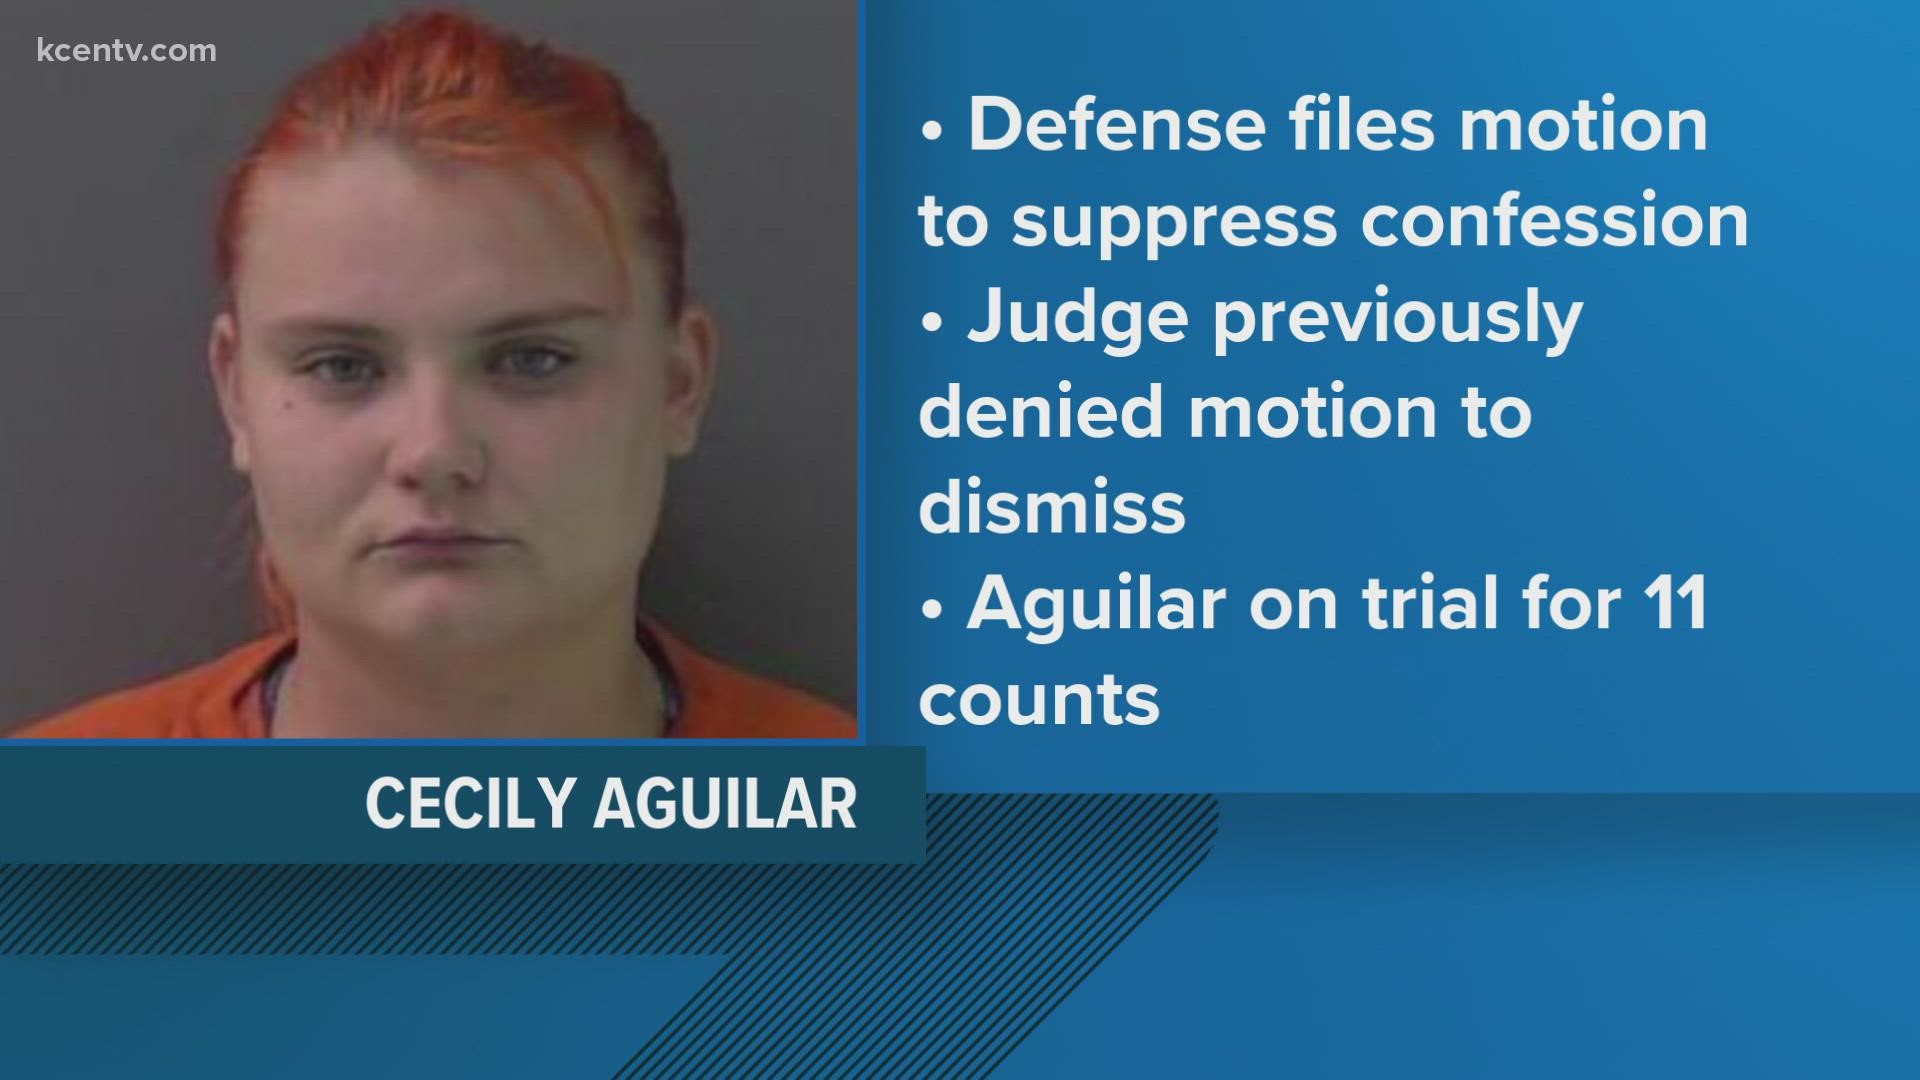 Cecily Aguilar's lawyers are trying again to get her confession thrown out, the defense filed a motion to suppress the confession.